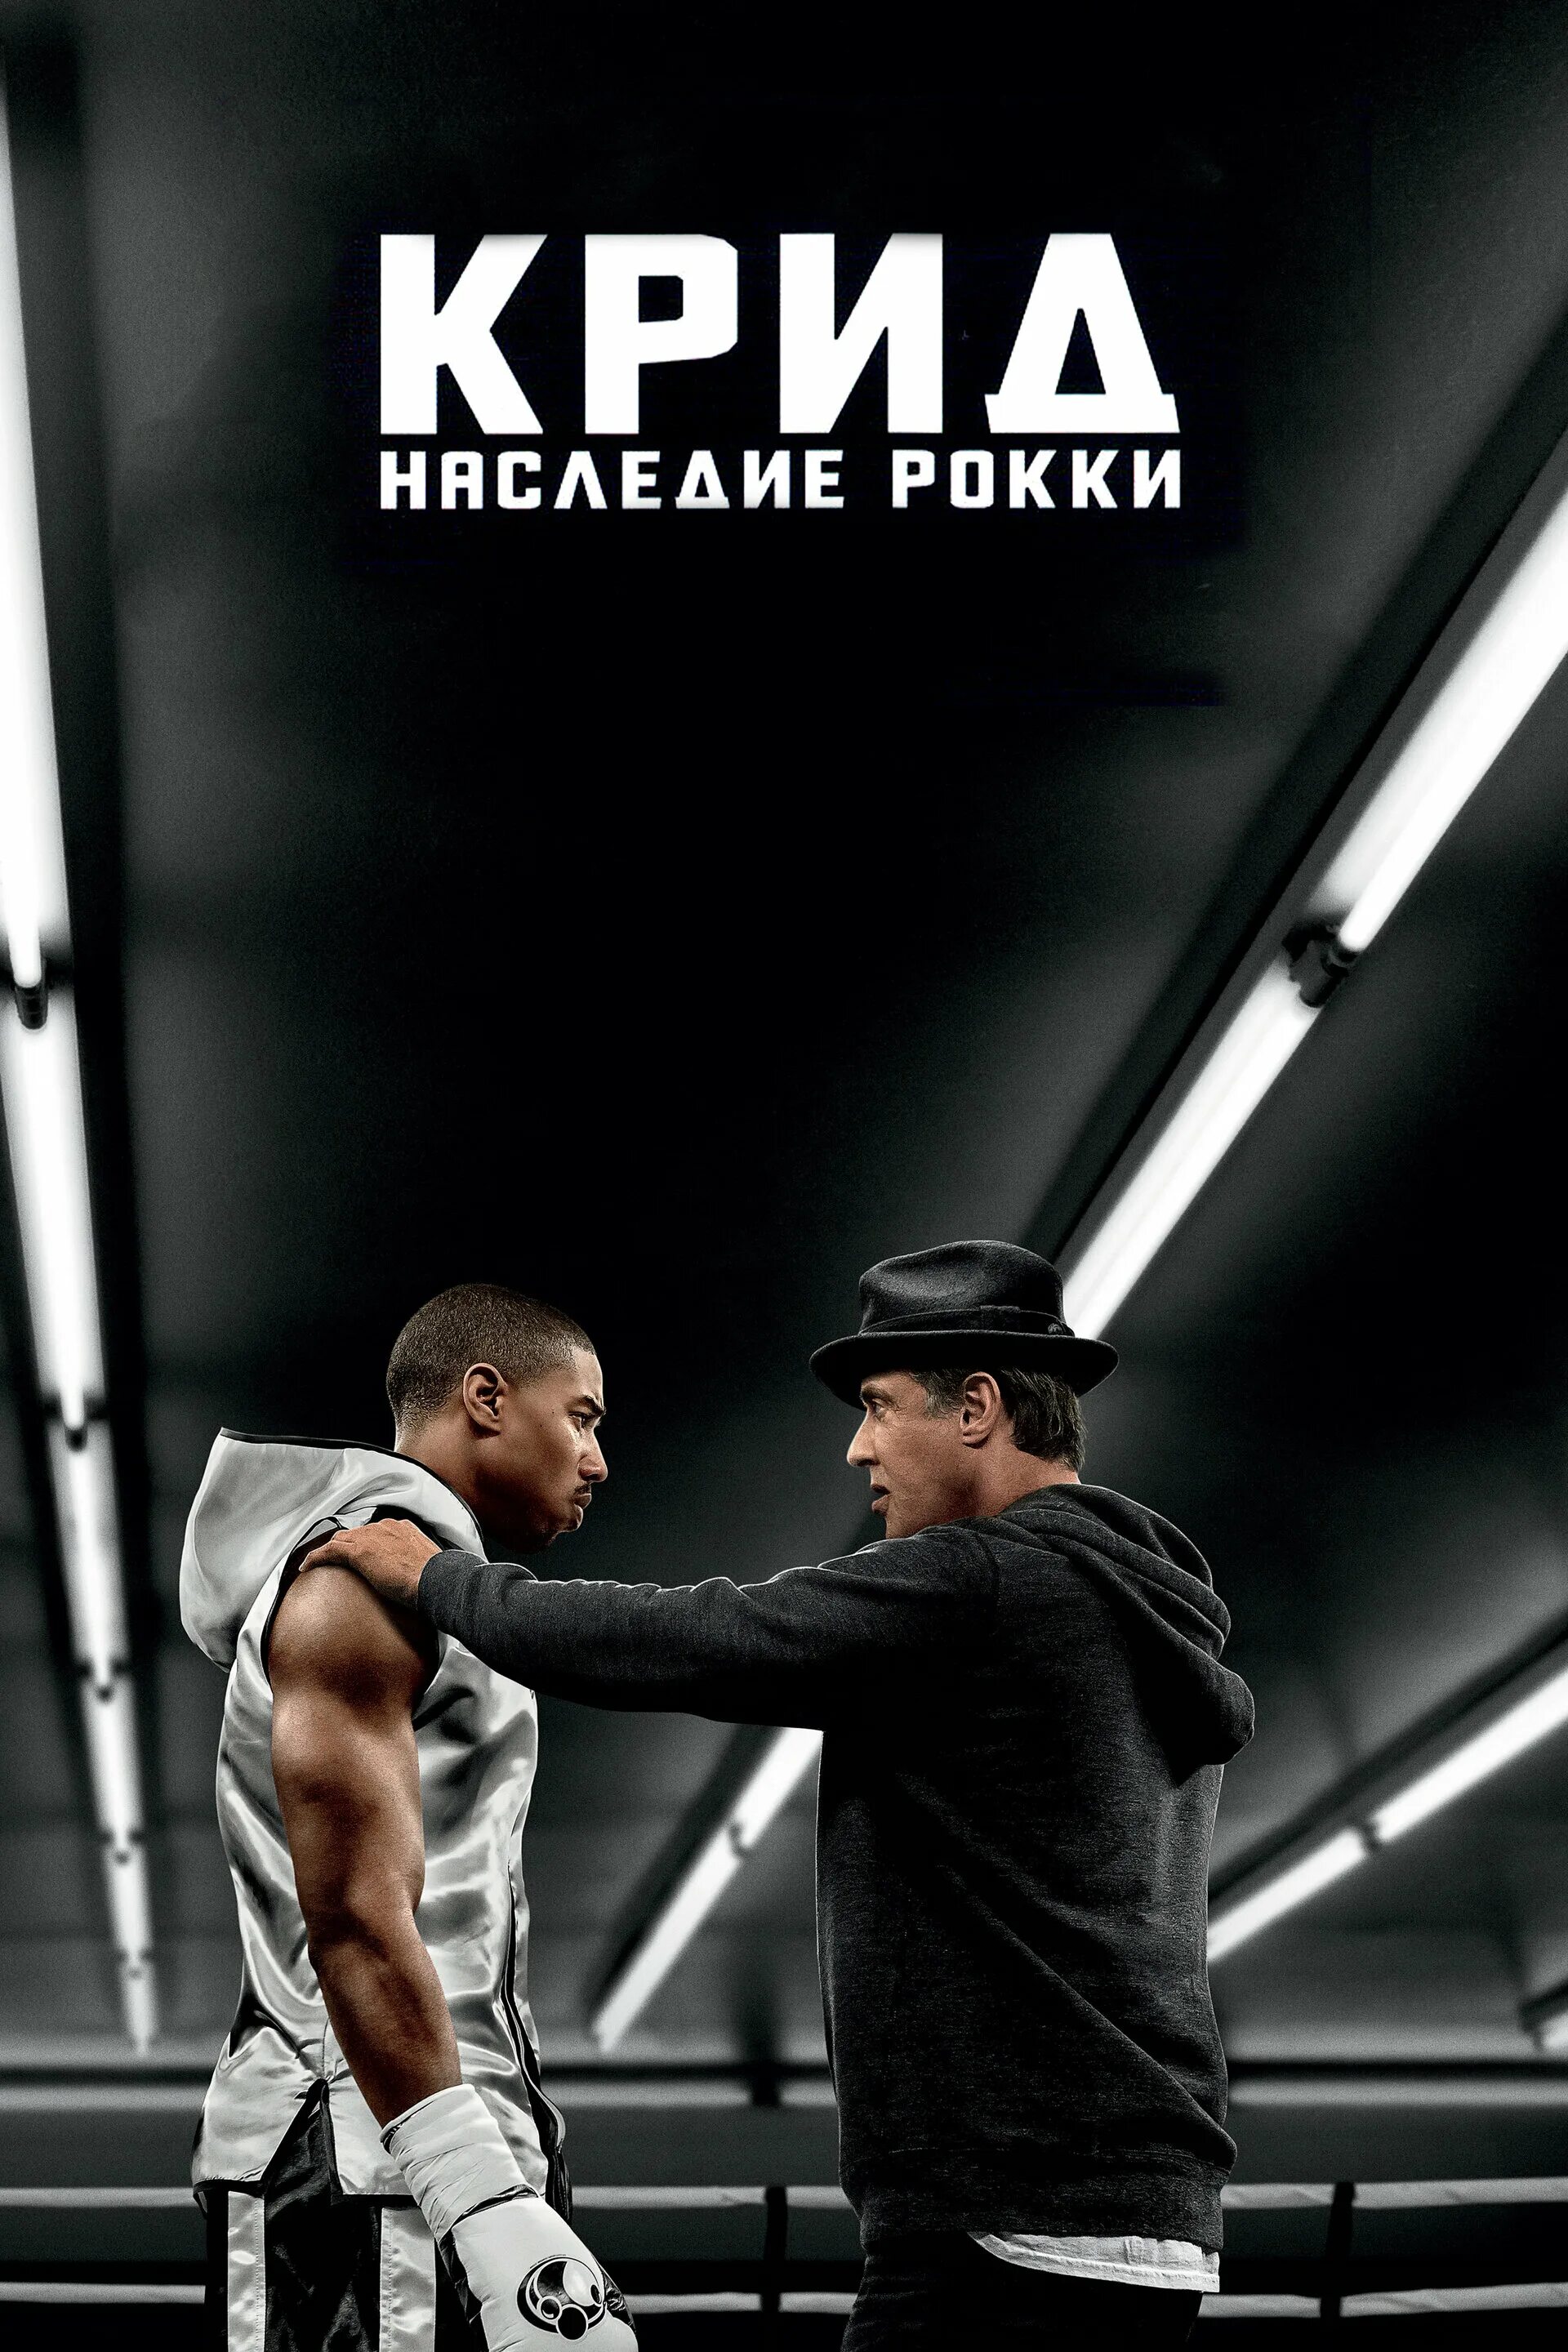 Creed soundtrack. Крид: наследие Рокки (2015). Крид наследие Рокки Тесса Томпсон. Крид наследие Рокки 2015 адонис.